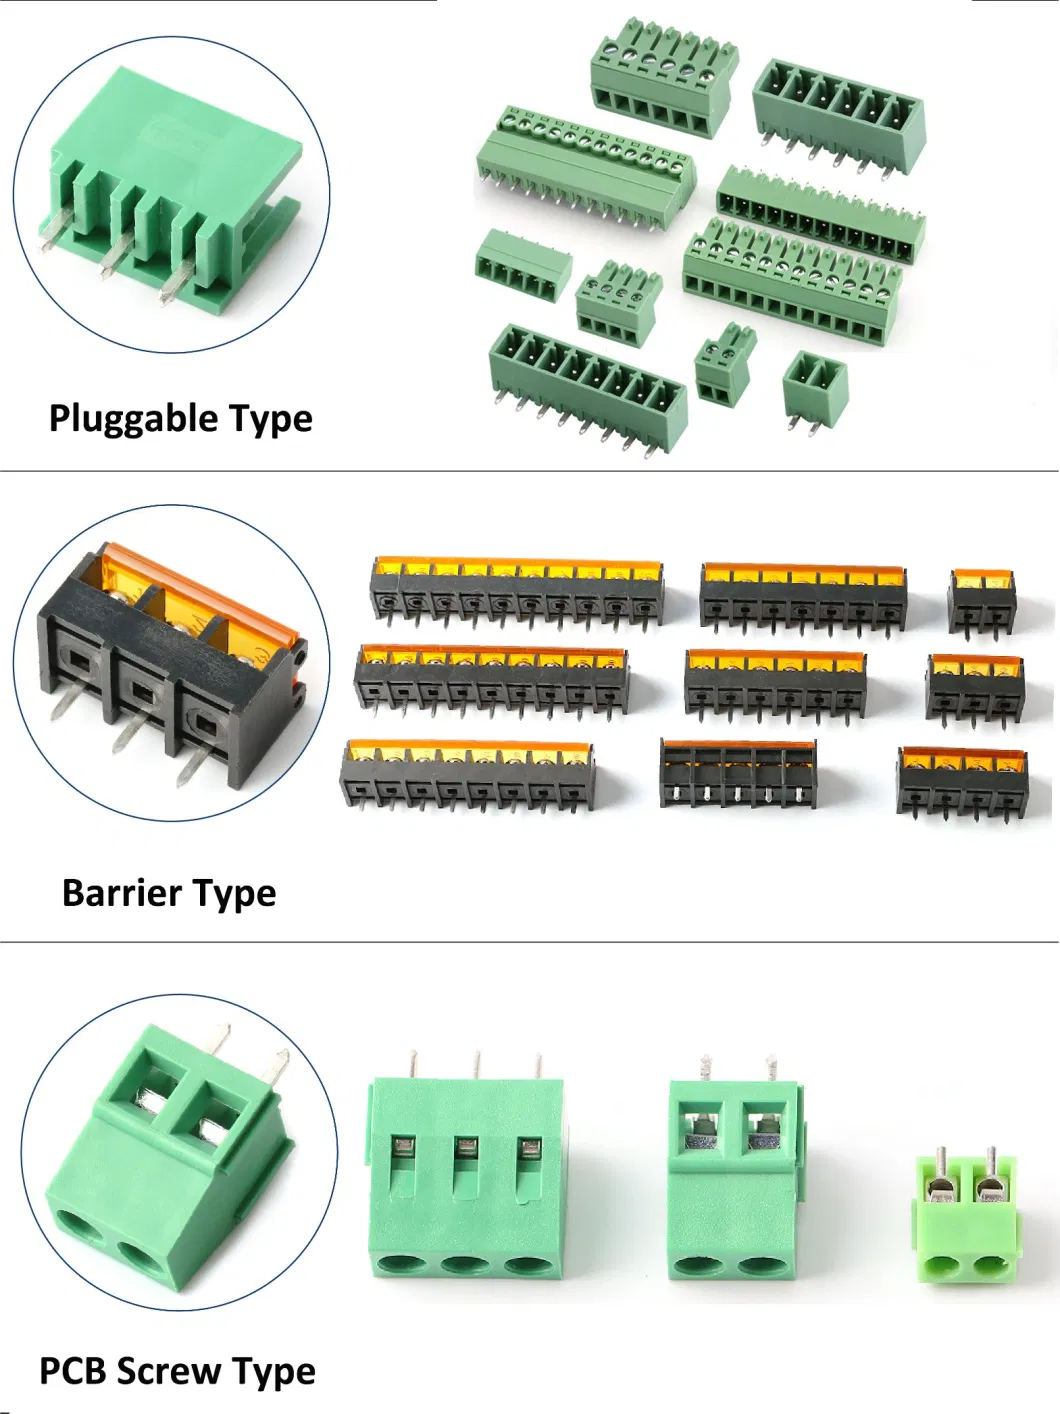 Pluggable PCB Screw Wire Electrical Terminals Blocks Barrier Terminal Block